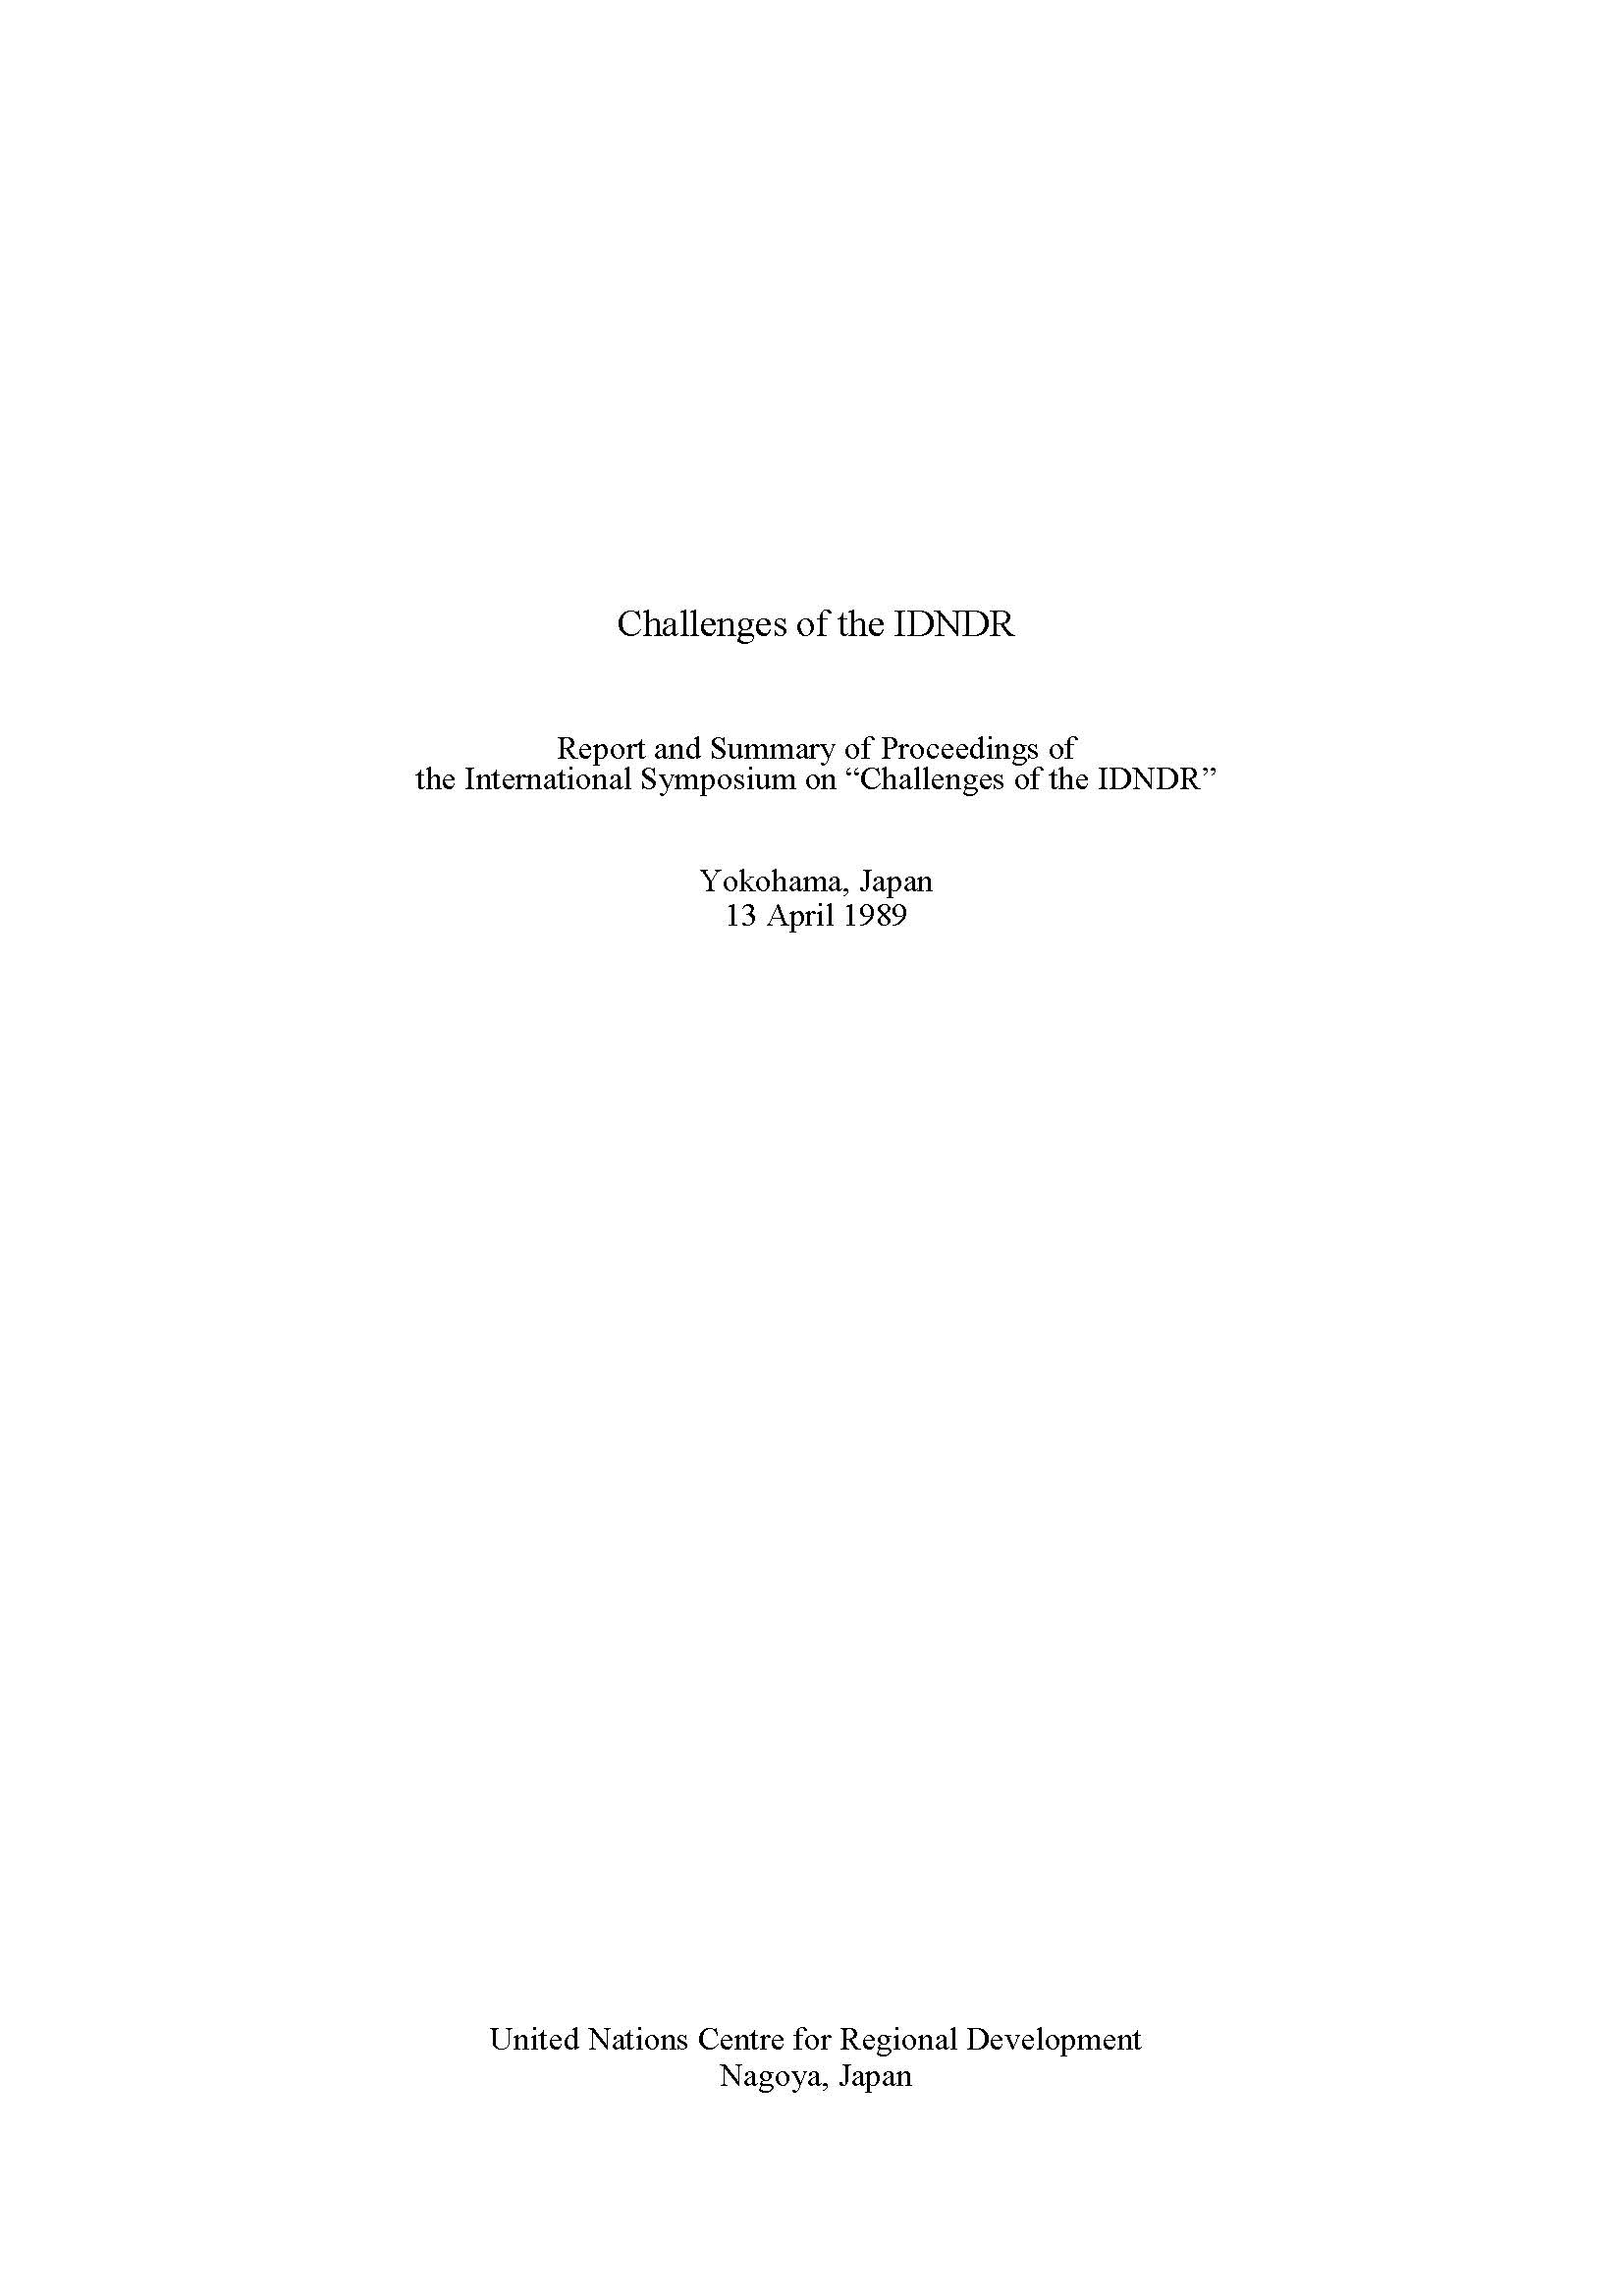 Cover of the Report and Summary of Proceedings of the International Symposium on "Challenges of the 